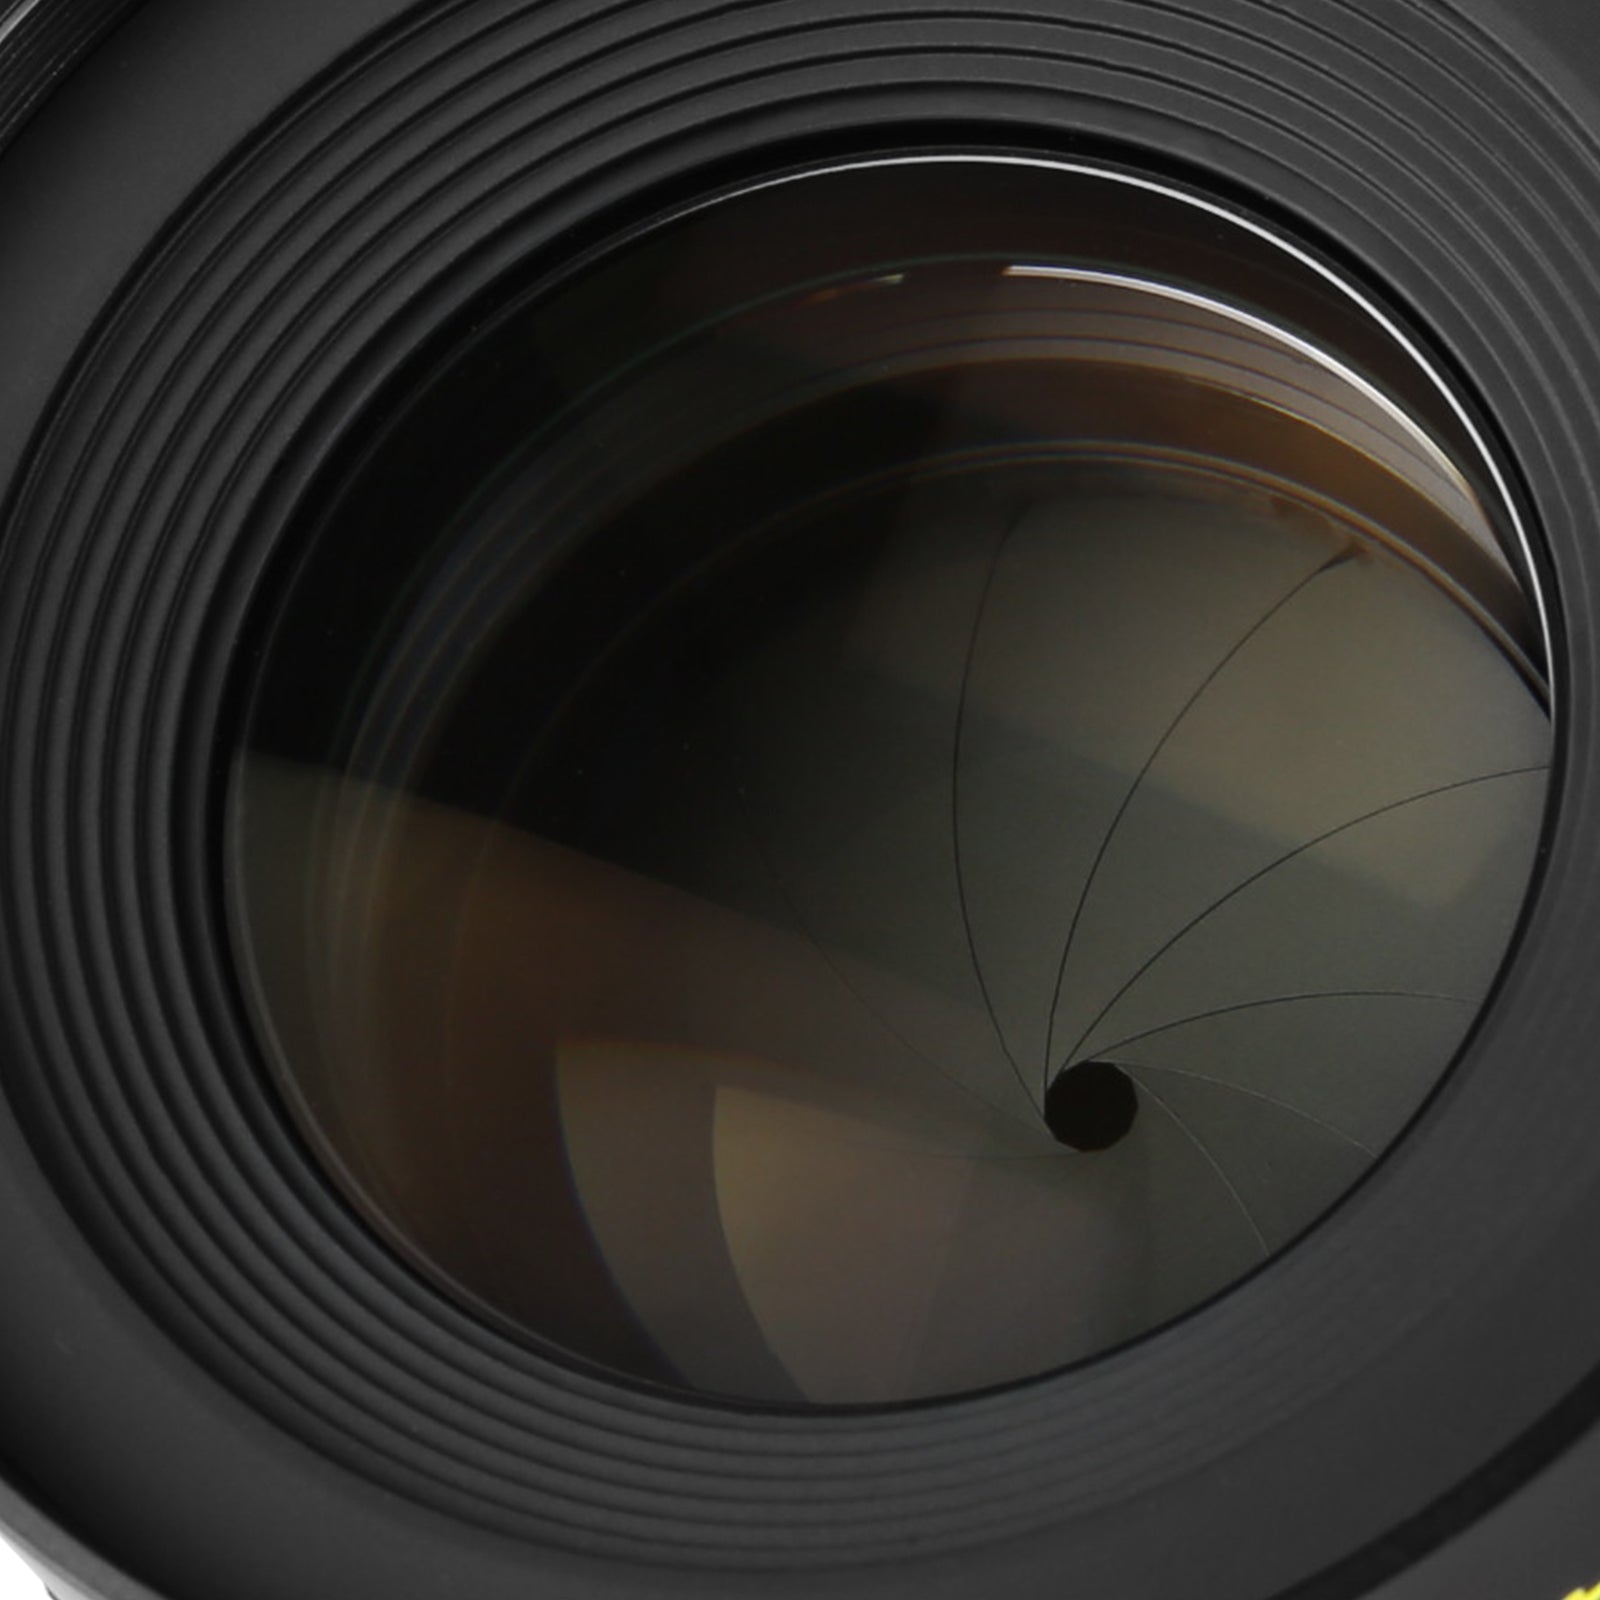 Meike Cinema Full Frame Cinema Prime 85mm T2.1 Lens (Canon EF Mount) in a Front Close-Up View